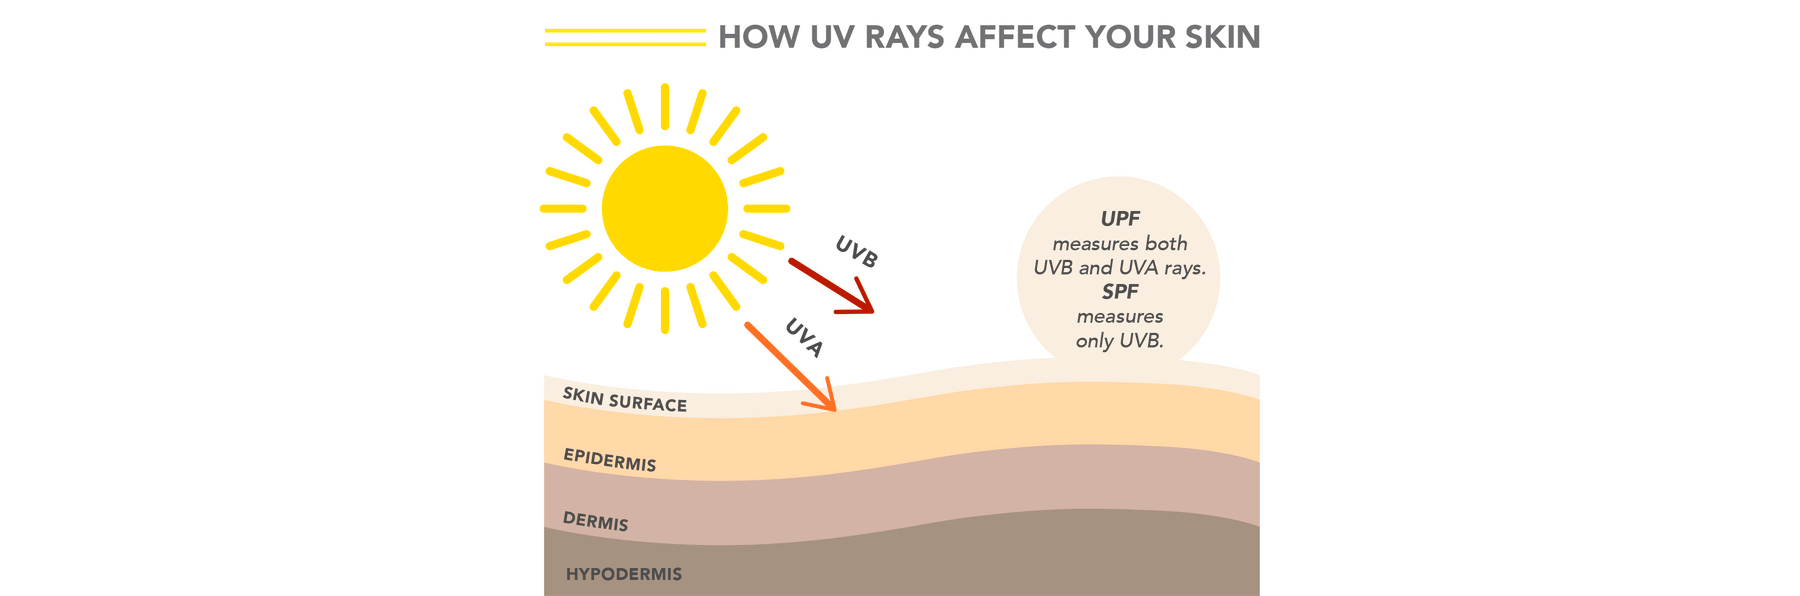 How UV Rays Affect Your Skin. UPF measures both UVA and UVB Rays. SPF only Measures UVB Rays. Sun50 clothing blocks both UVA and UVB rays and has the highest level of protection. - SUN50 